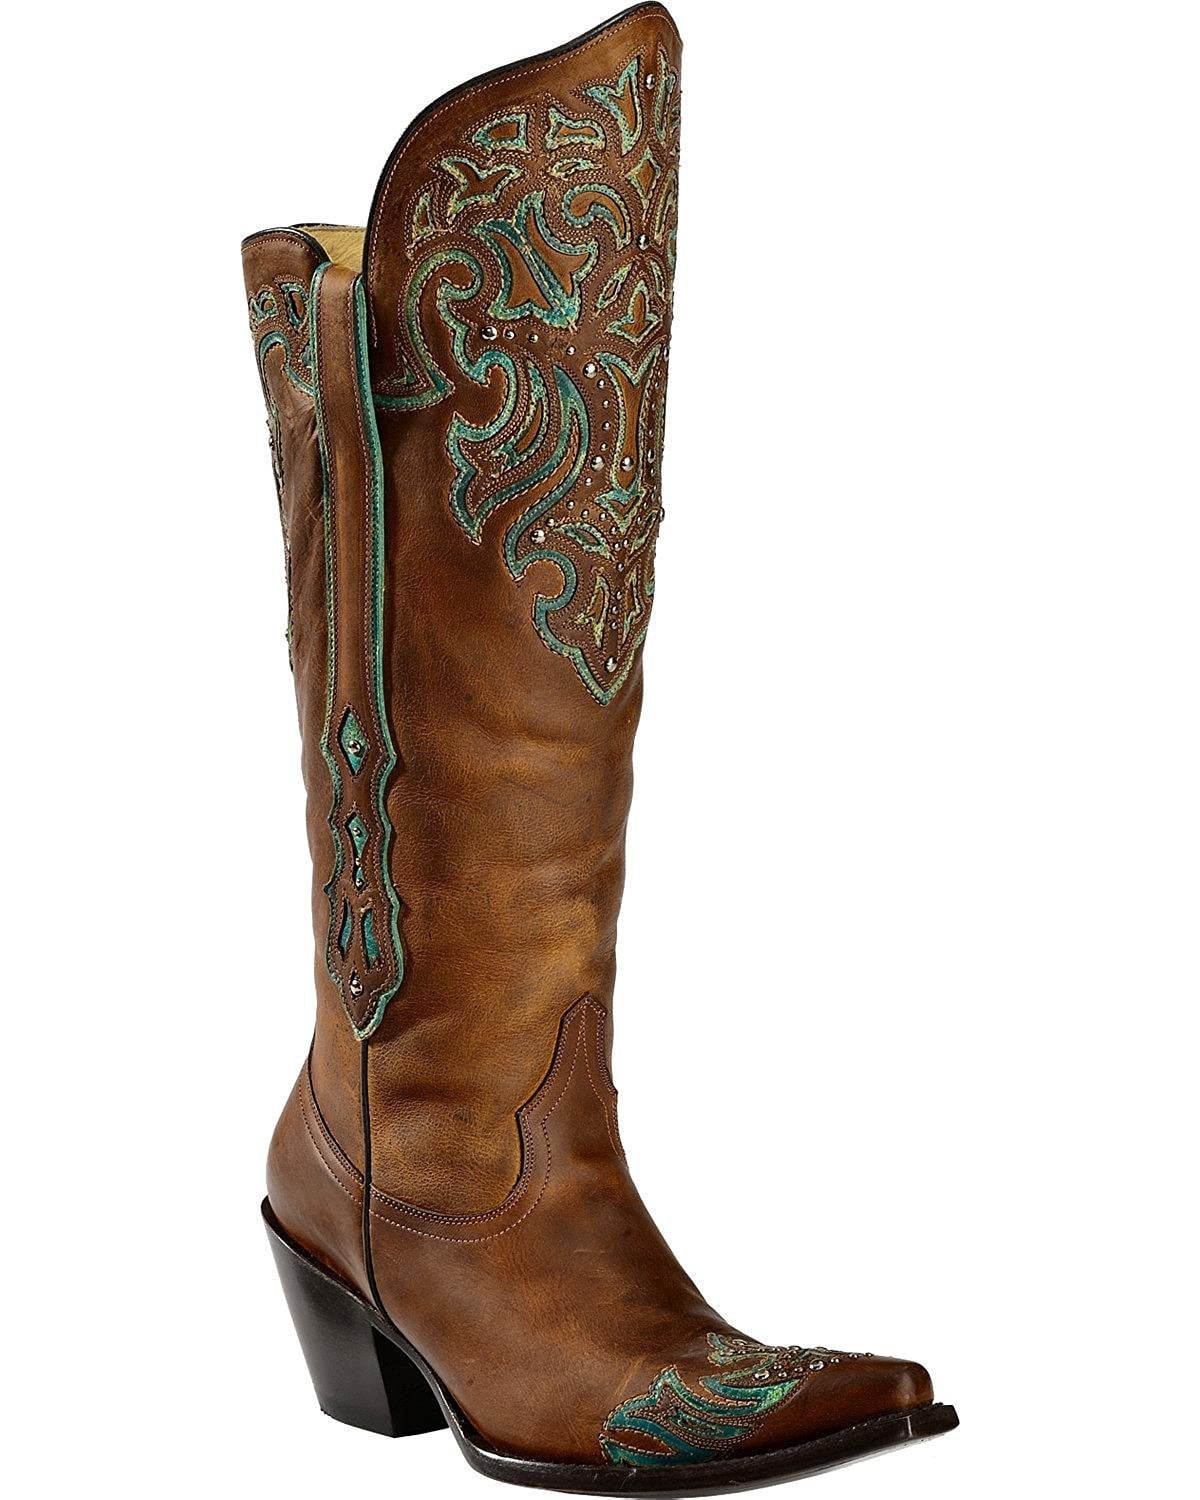 CORRAL Women's Turquoise Inlay Knee Top Snip Toe Cowgirl Boots G1182 (6 ...